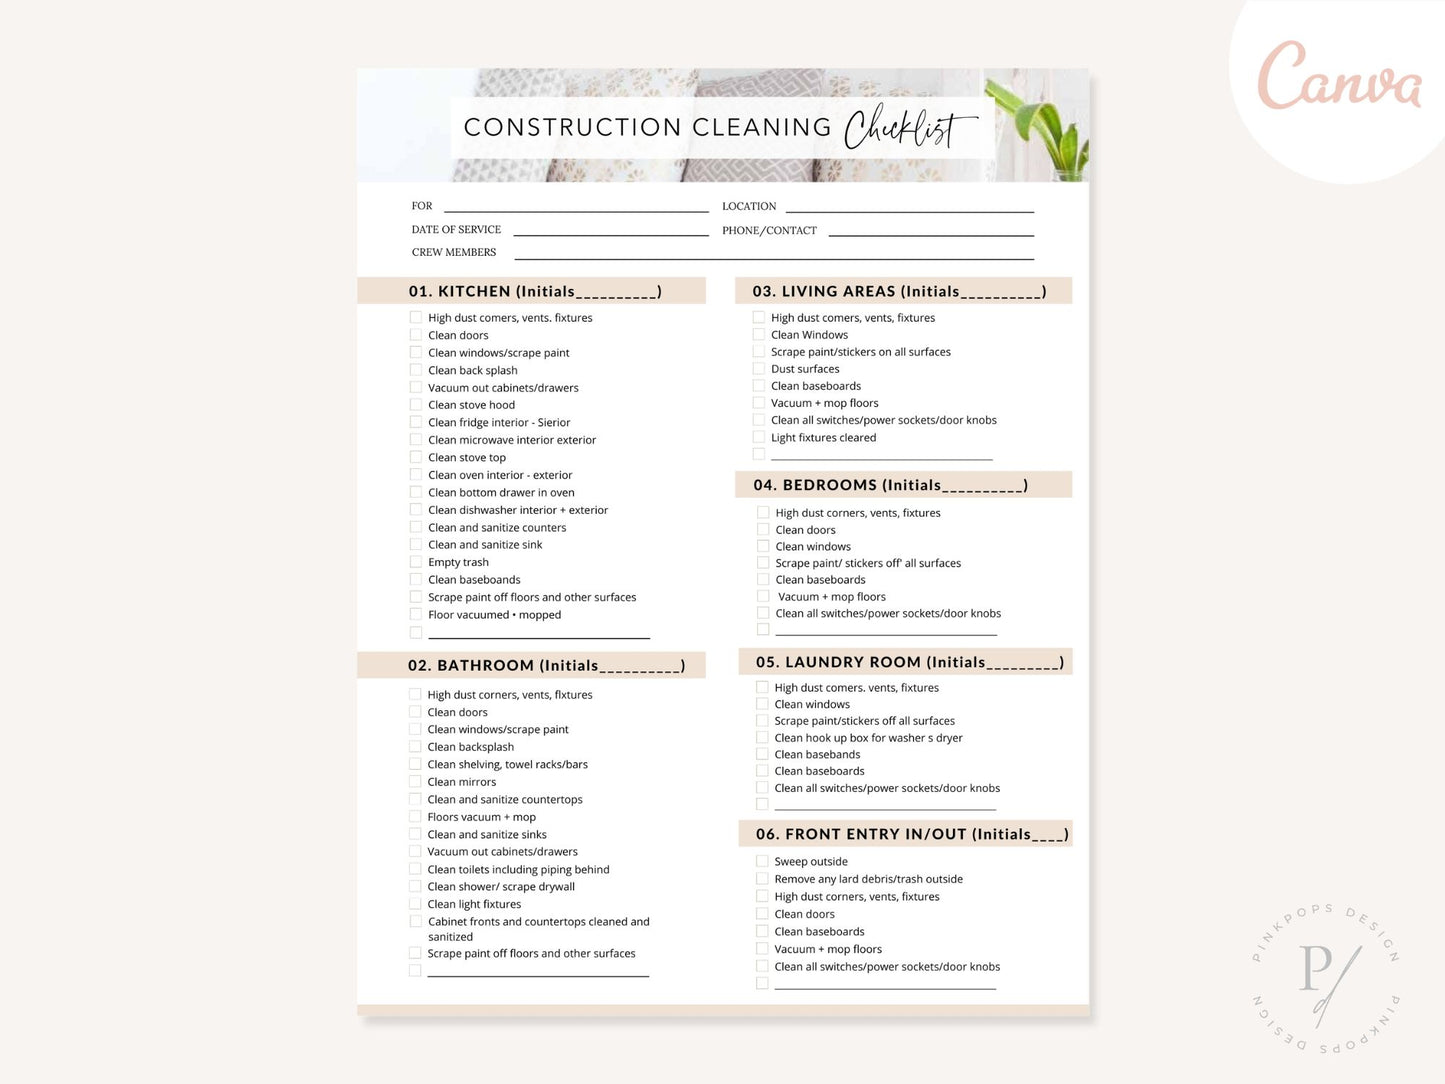 Construction Cleaning Checklist - Editable template for ensuring a thorough and organized approach to post-construction cleaning tasks, delivering a polished and client-ready finish to construction projects.